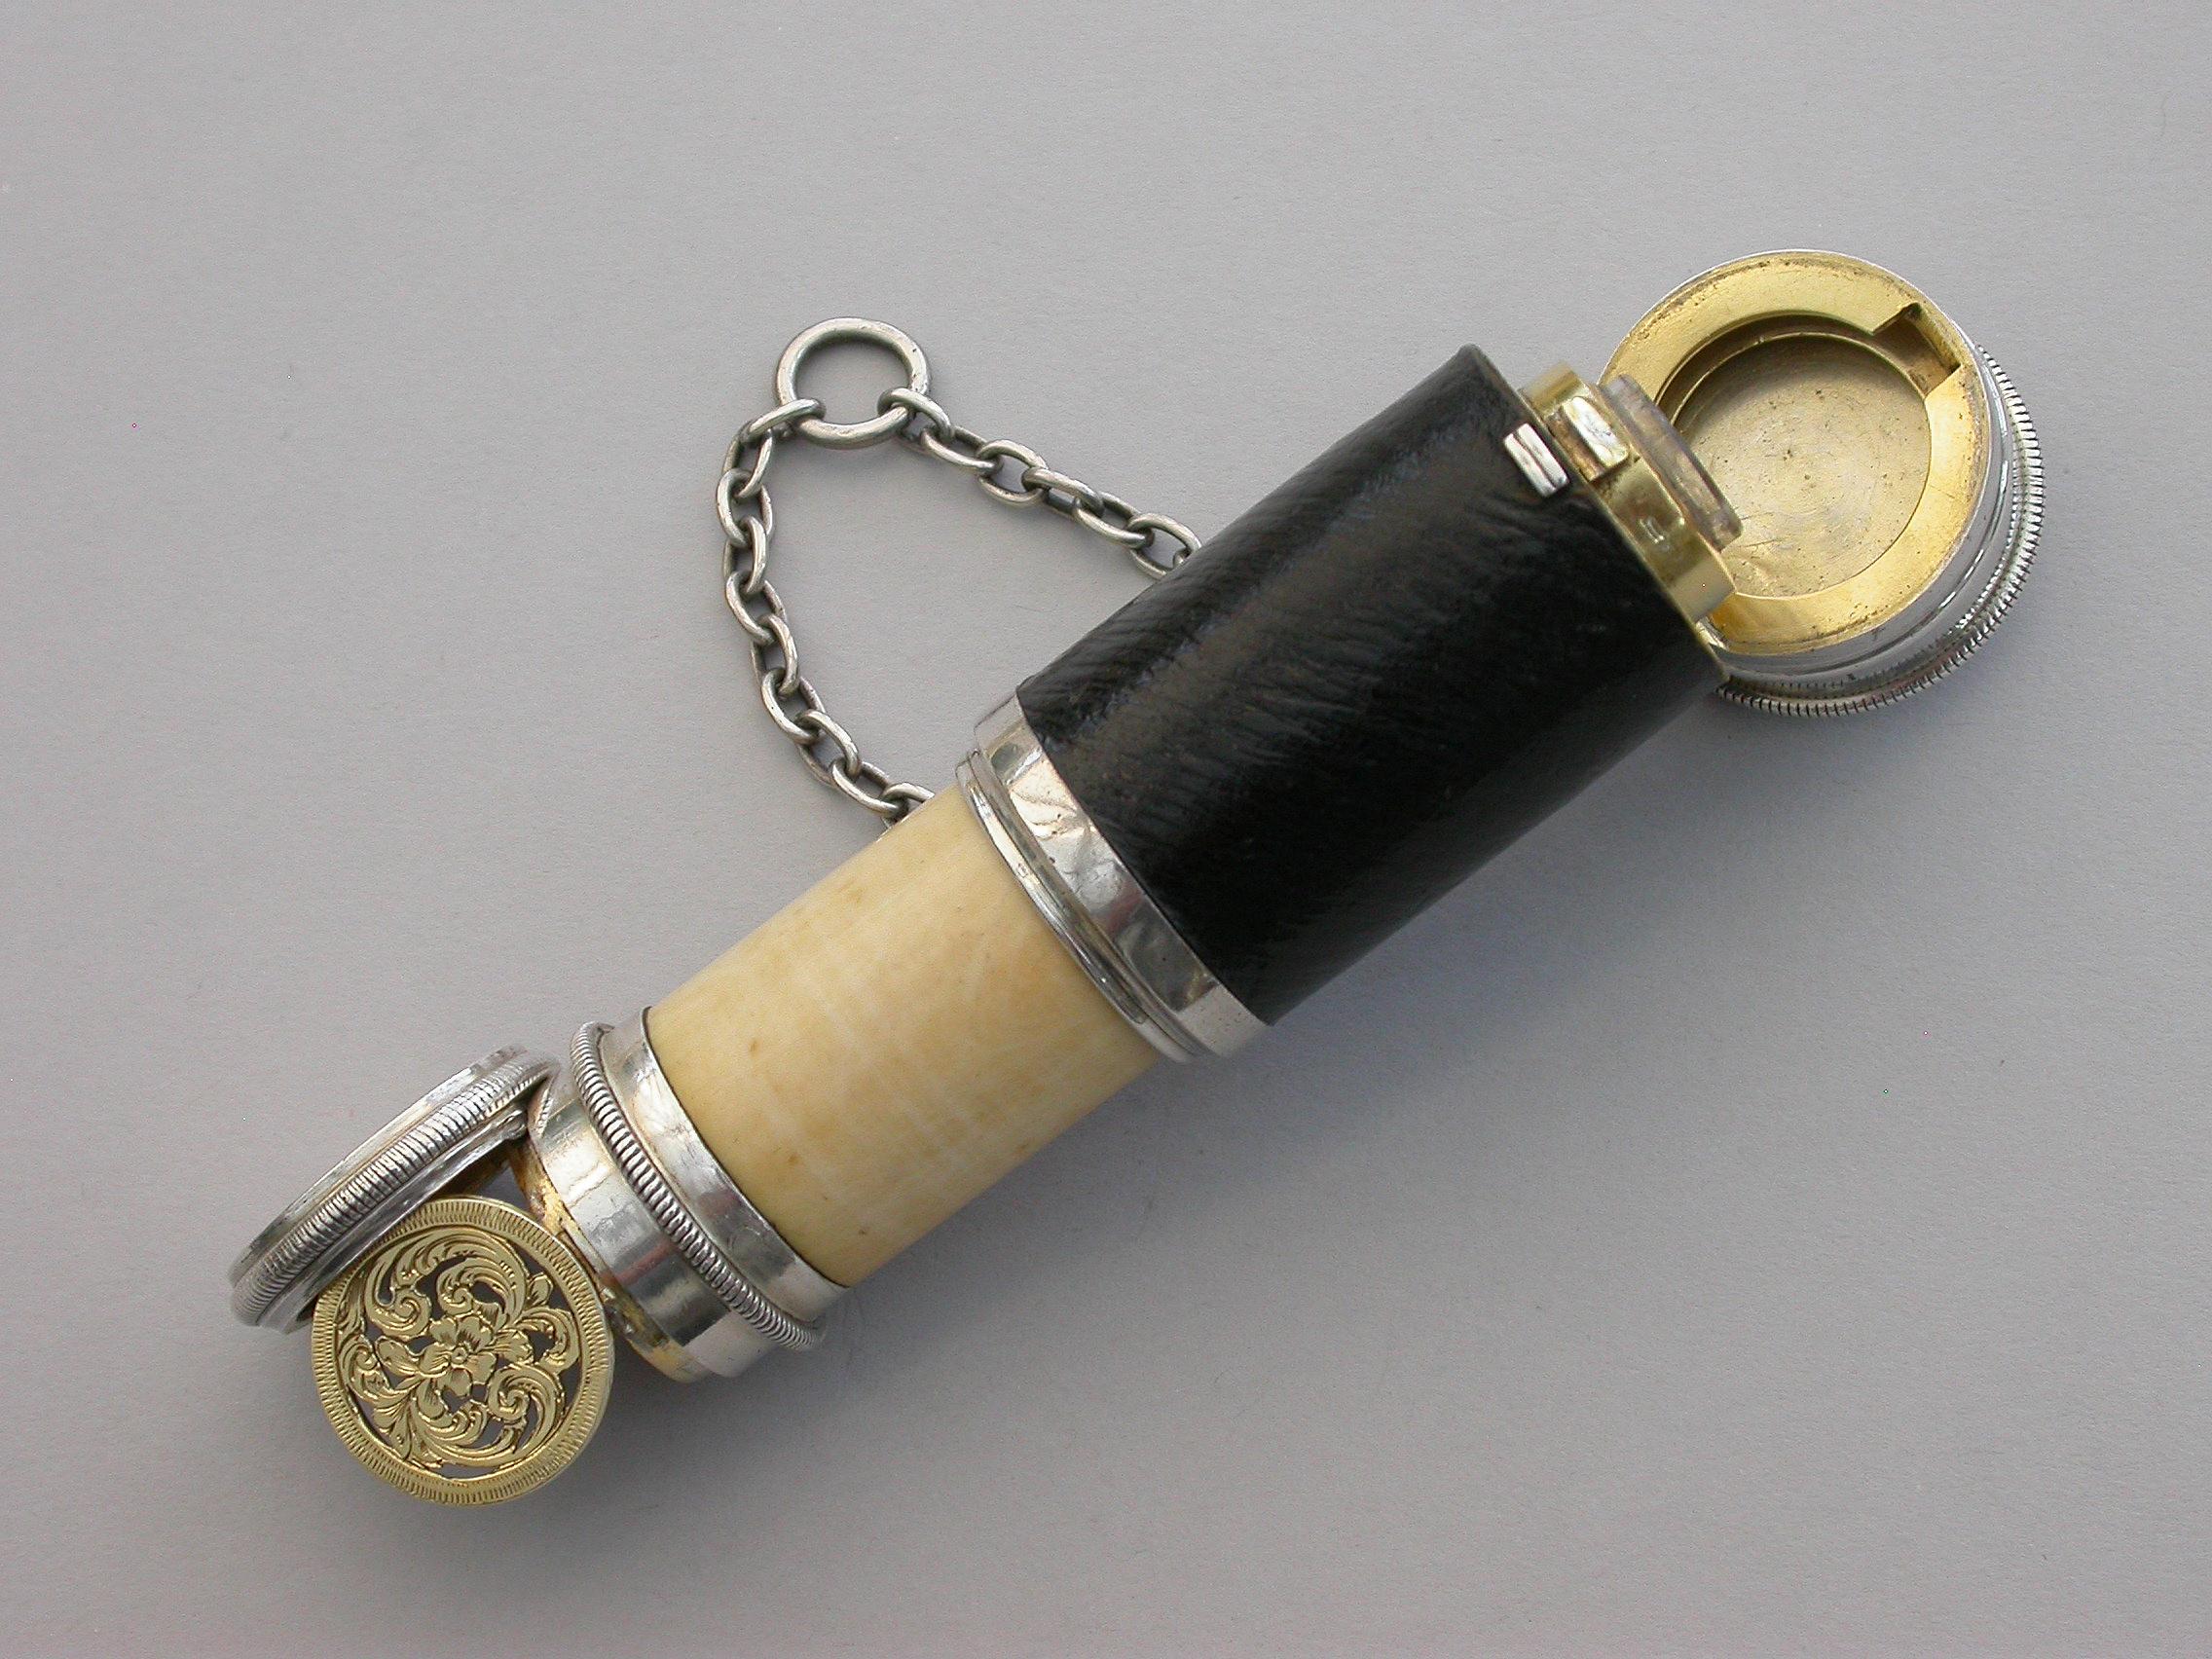 A fine quality and extremely rare novelty silver combined Scent Bottle and Vinaigrette made in the form of a telescope with attached chain and suspension ring, the middle of the outer body covered in leather and the inner sleeve formed from bone.